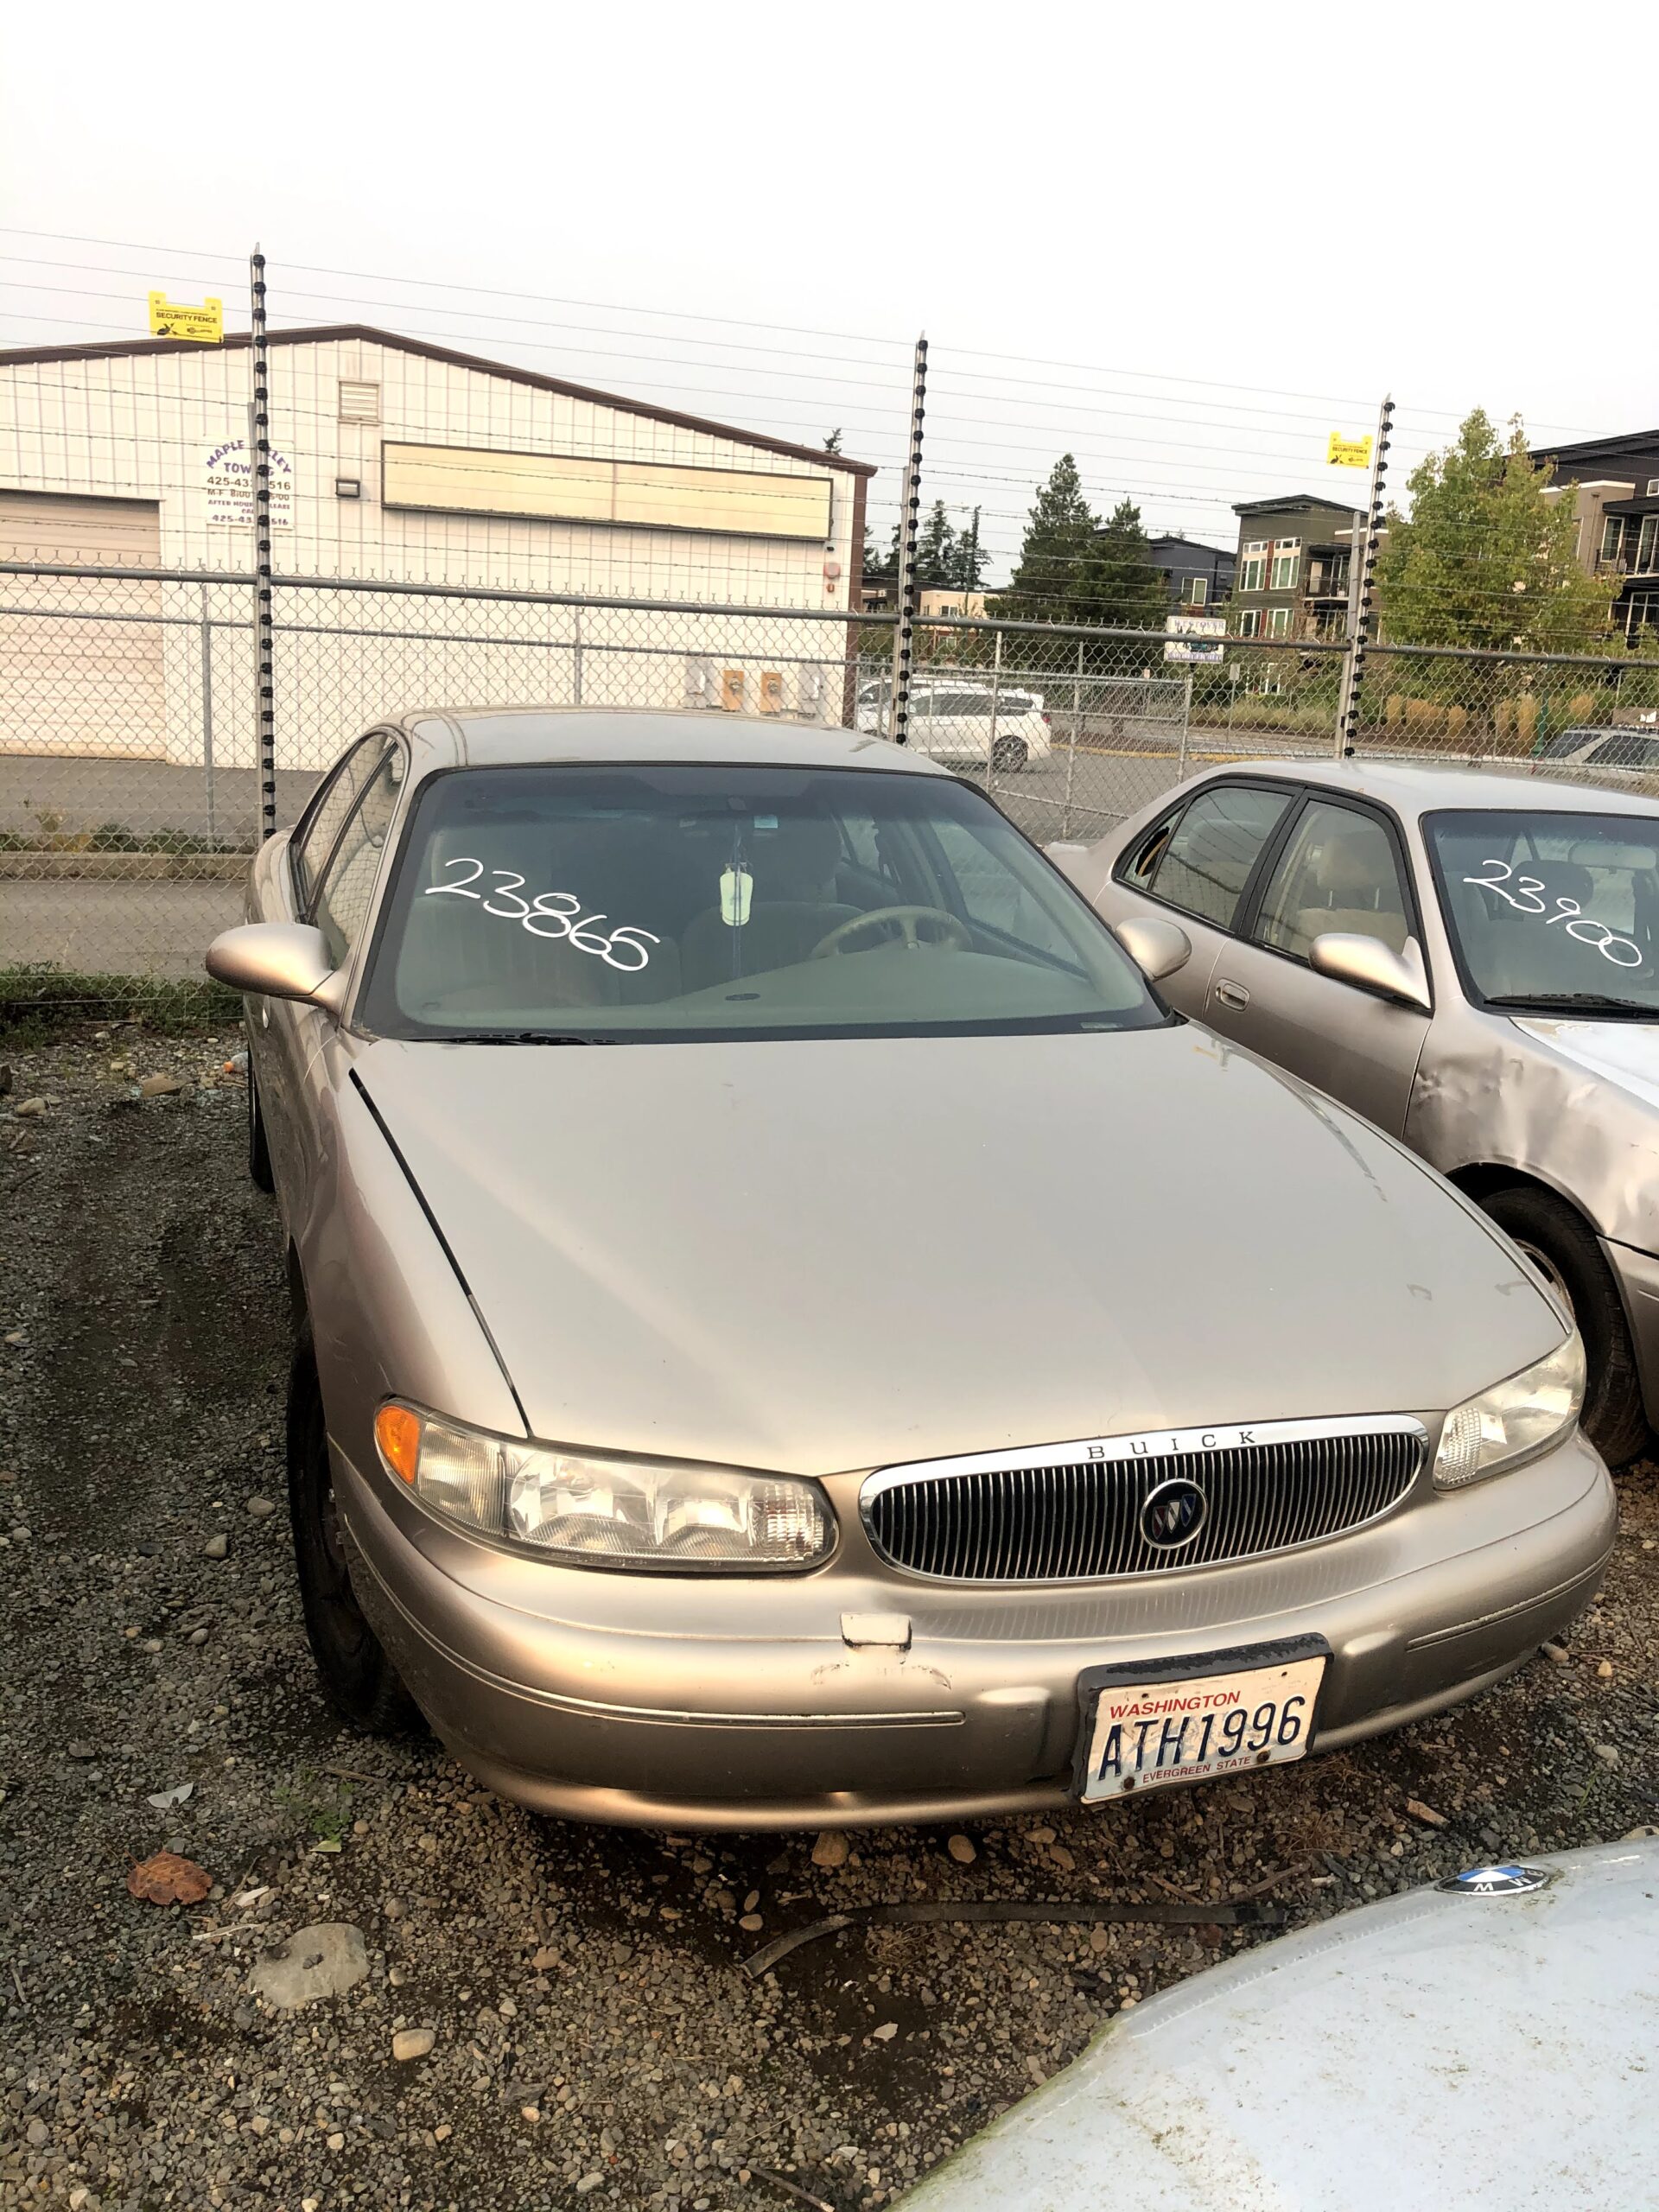 23865: 2000 - Buick - Century | Pro-Tow 24 Hr Towing 2000 Honda Accord Lowered